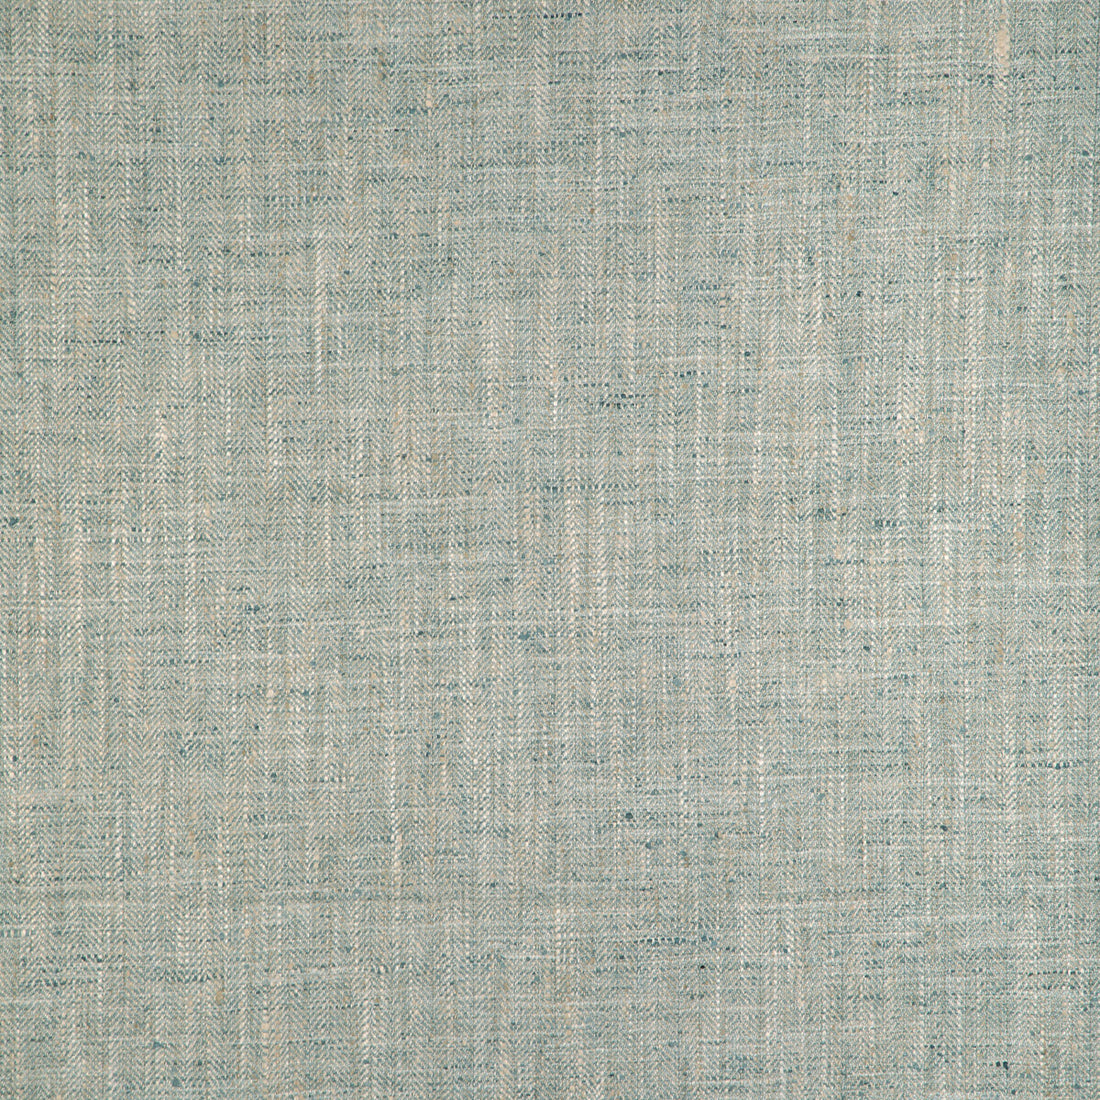 Benecia fabric in mist color - pattern 34566.15.0 - by Kravet Couture in the Jan Showers Glamorous collection